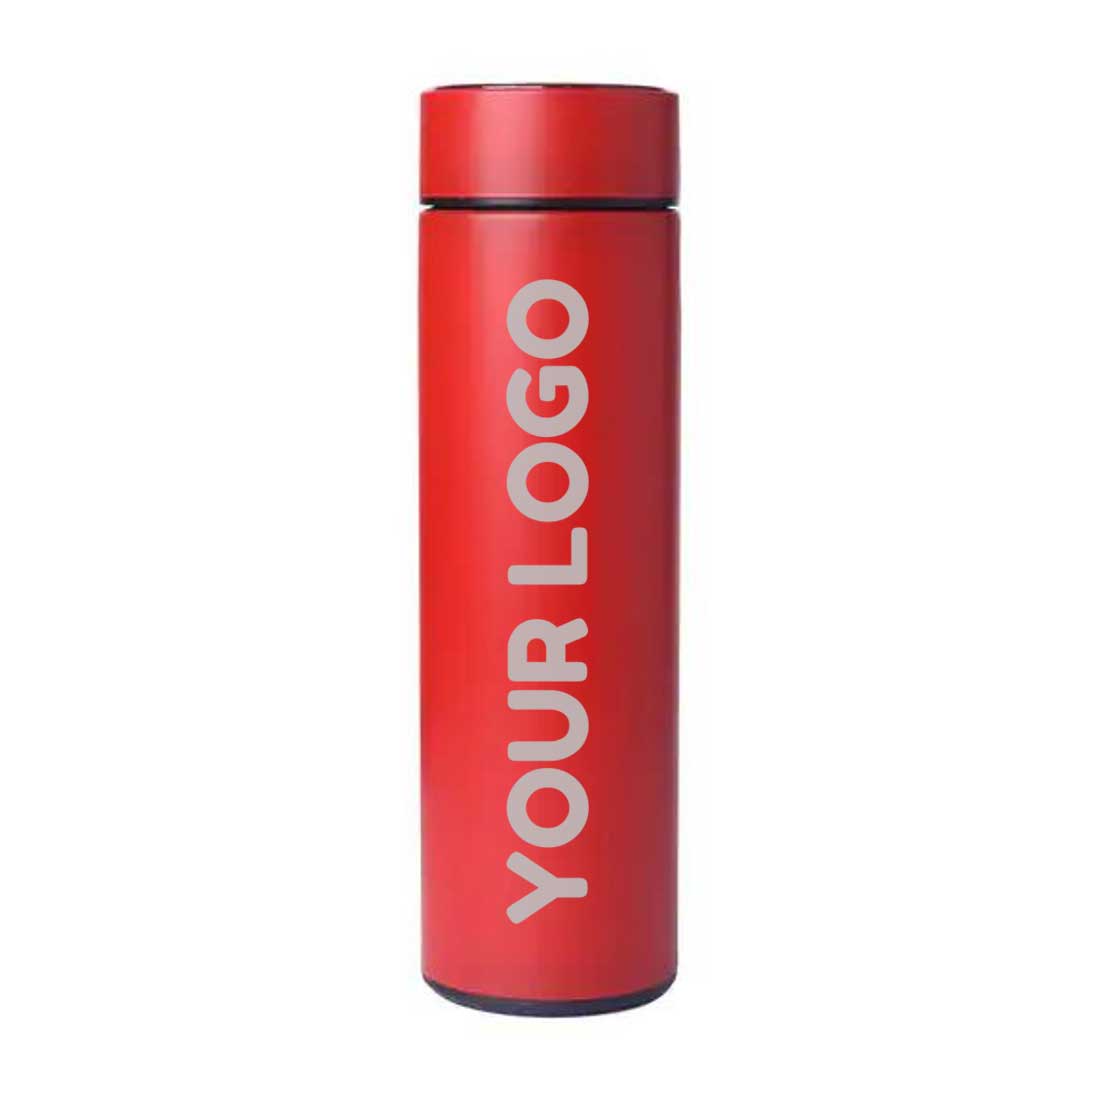 Personalised Thermal Flask for Tea with Temperature Display - ADD LOGO